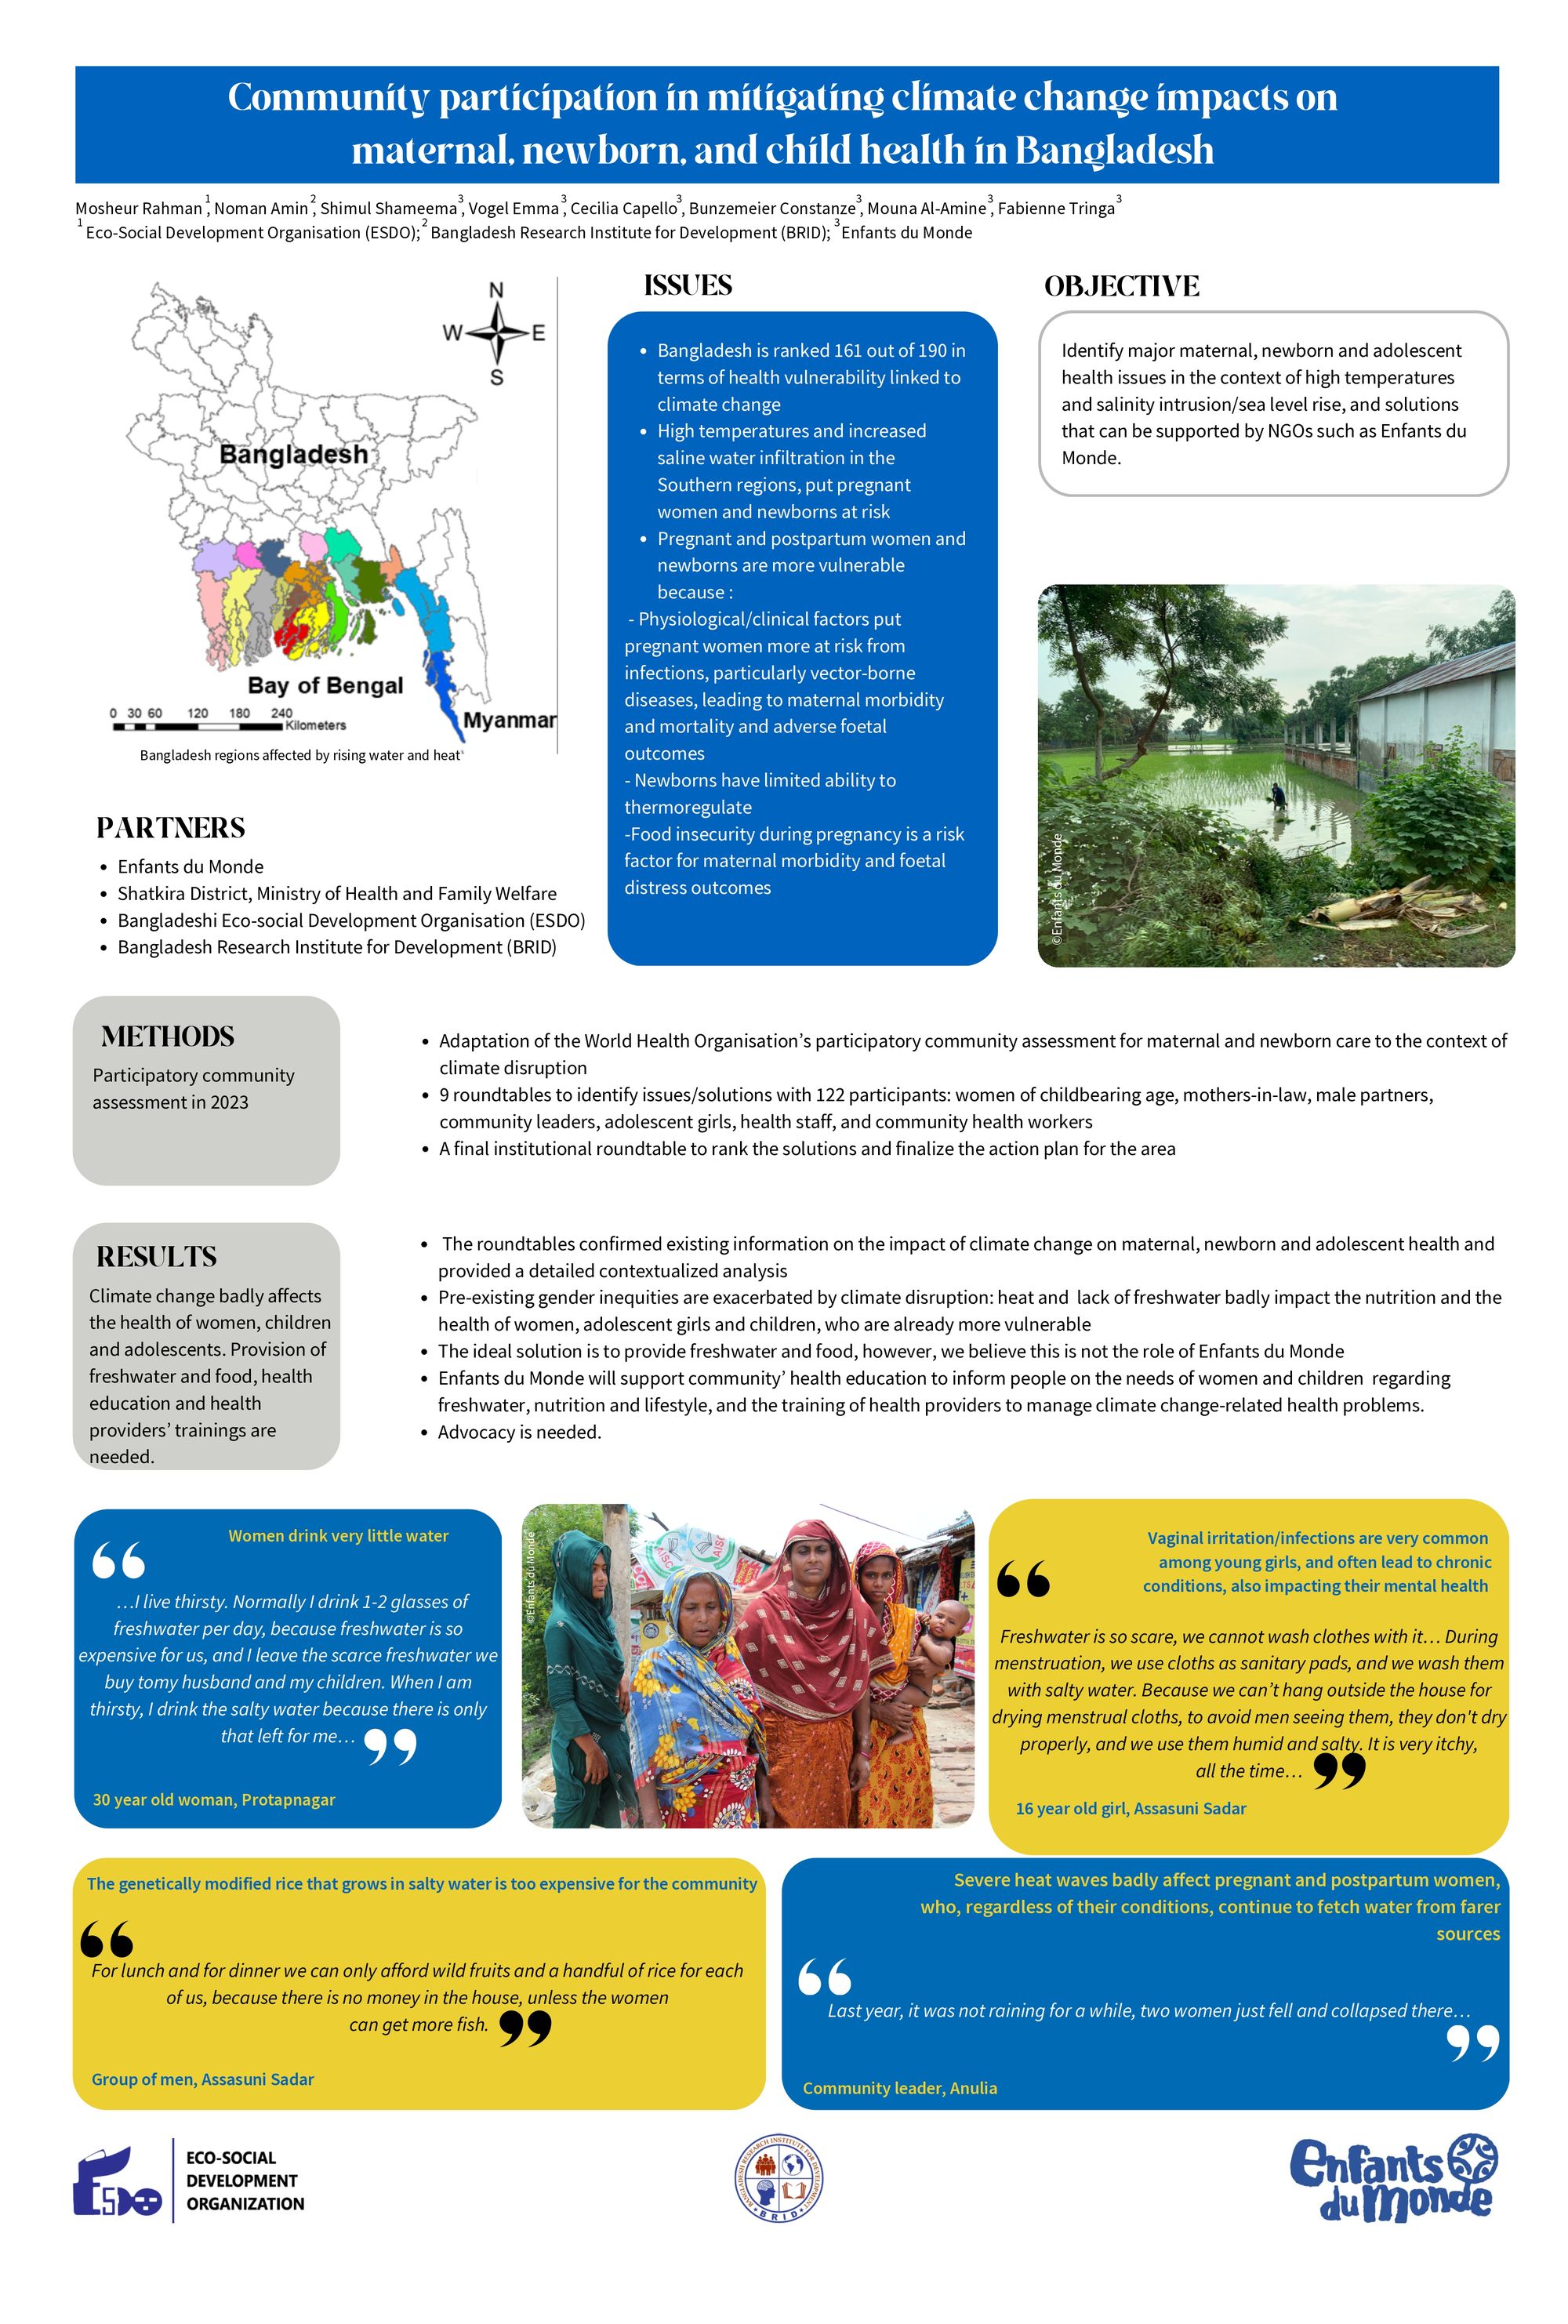 Community participation in mitigating climate change impacts on maternal, newborn, and child health in Bangladesh